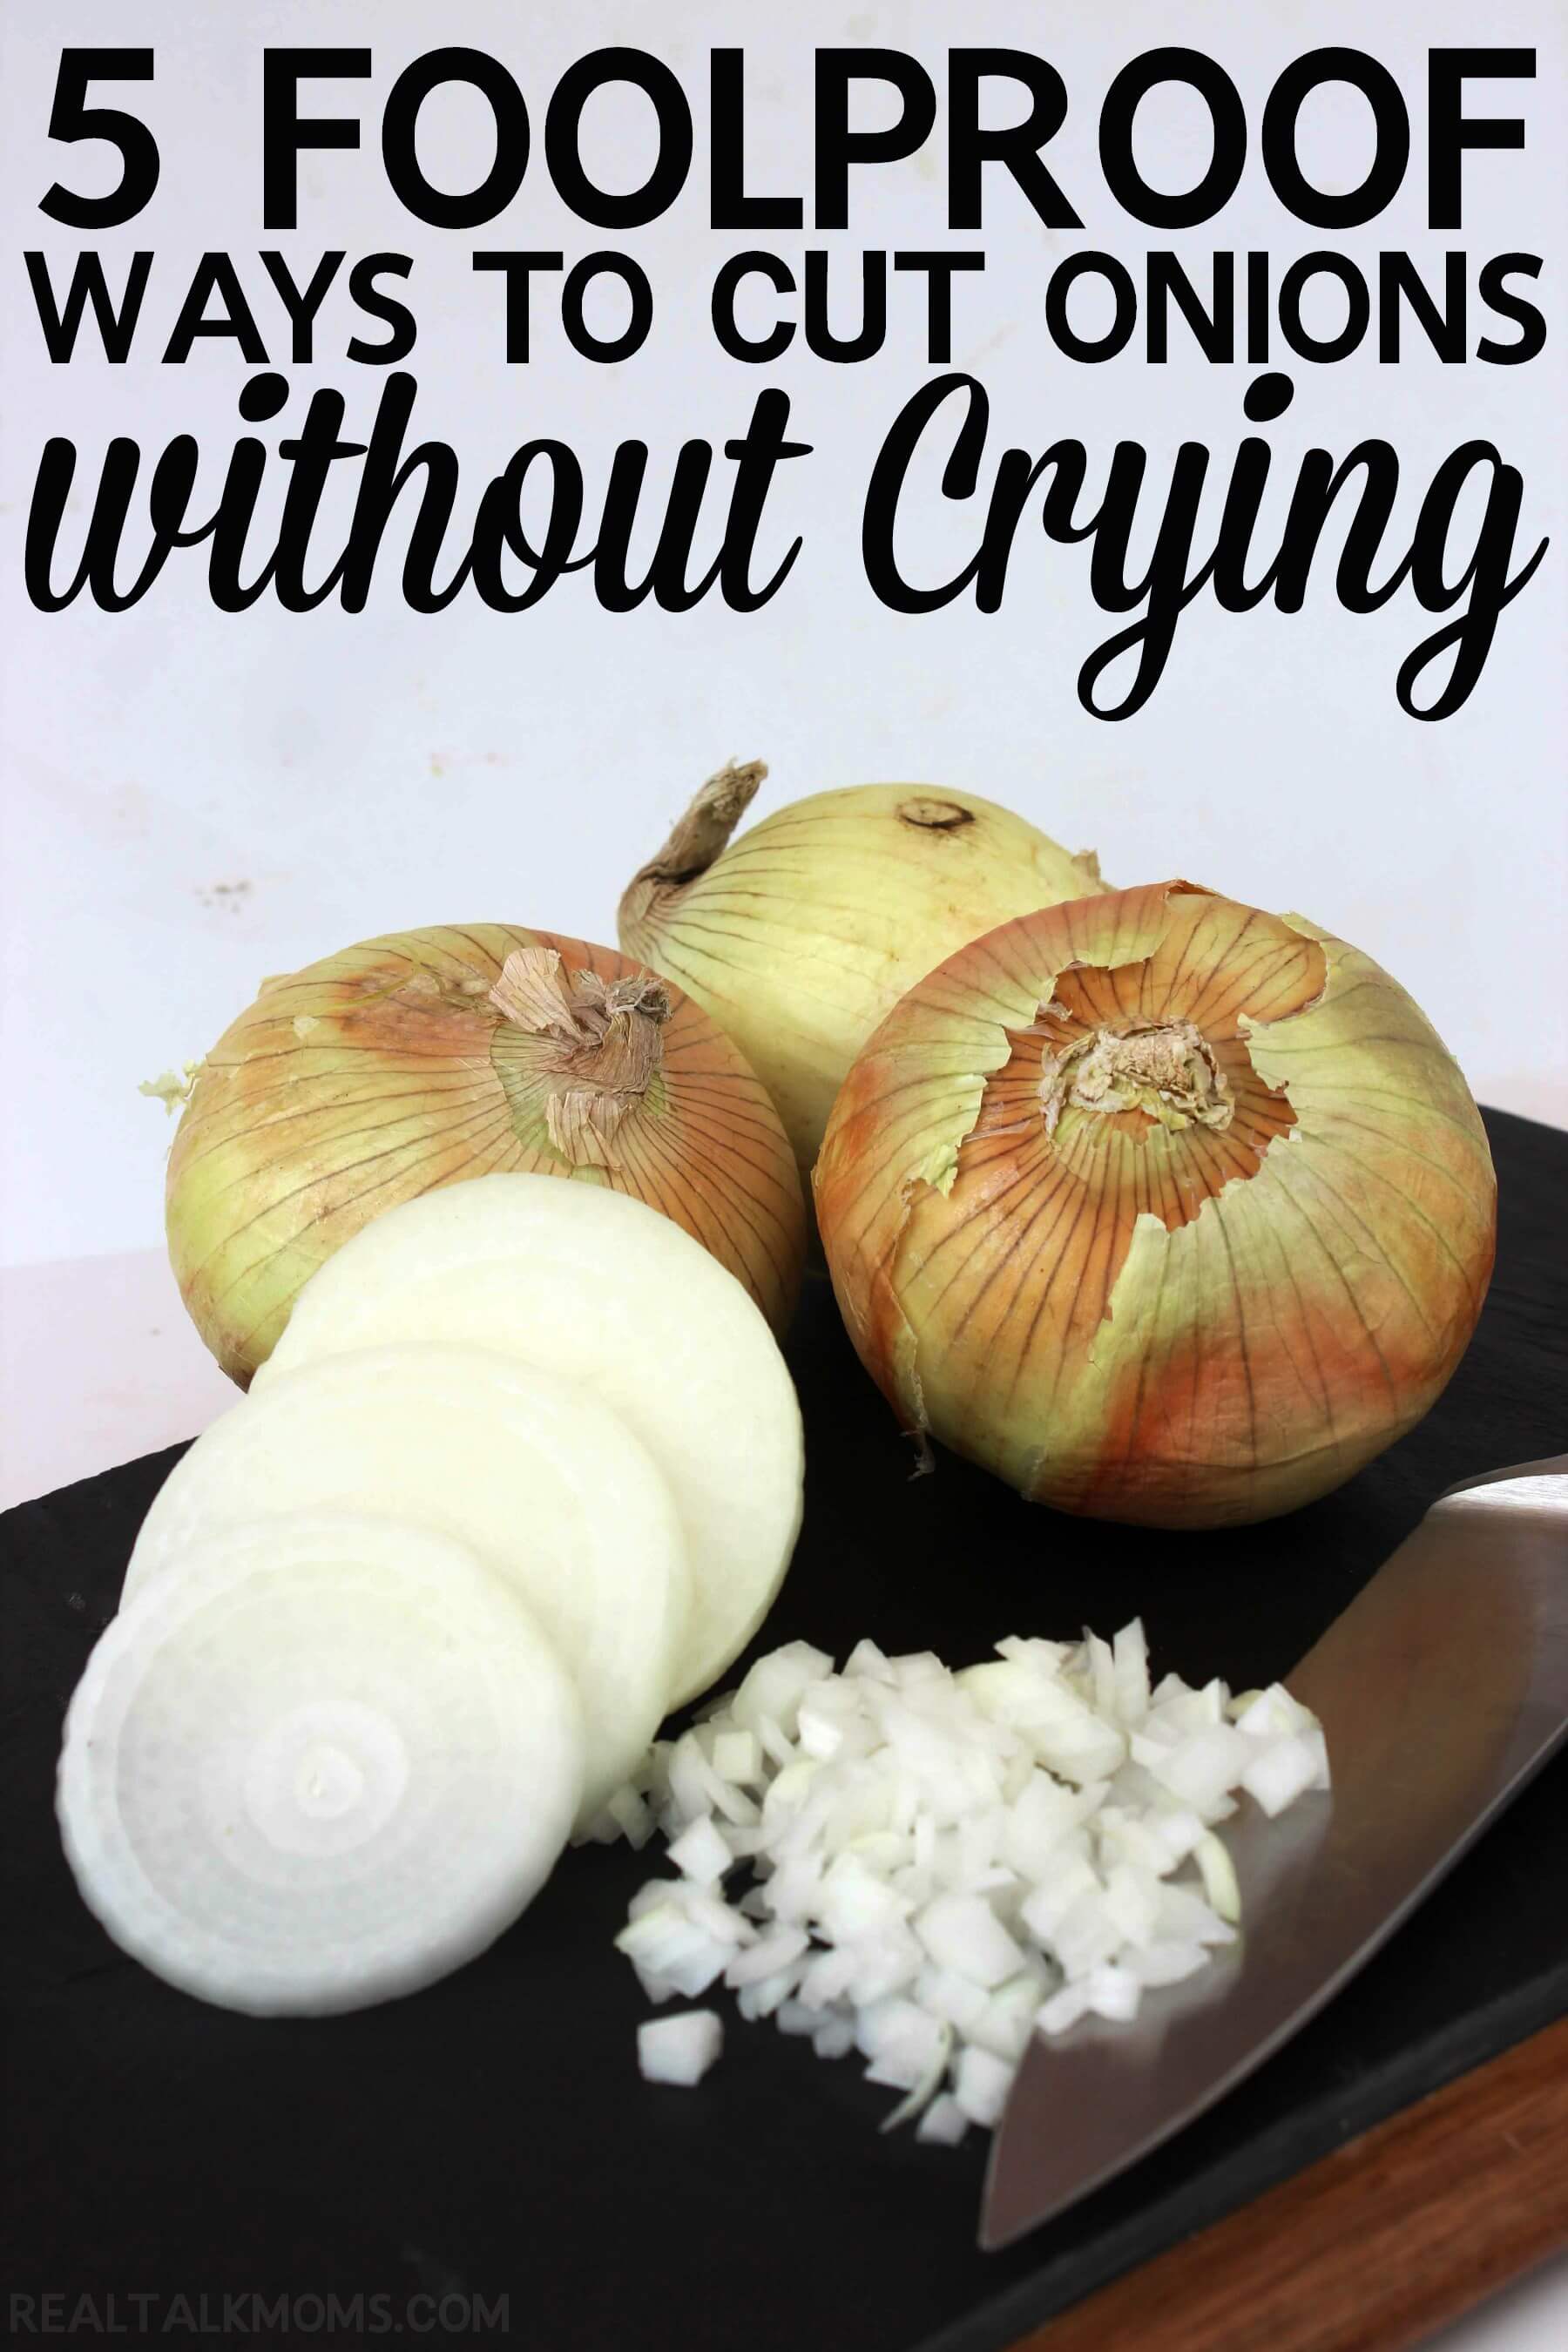 5-Foolproof-ways-to-cut-onions-without-crying